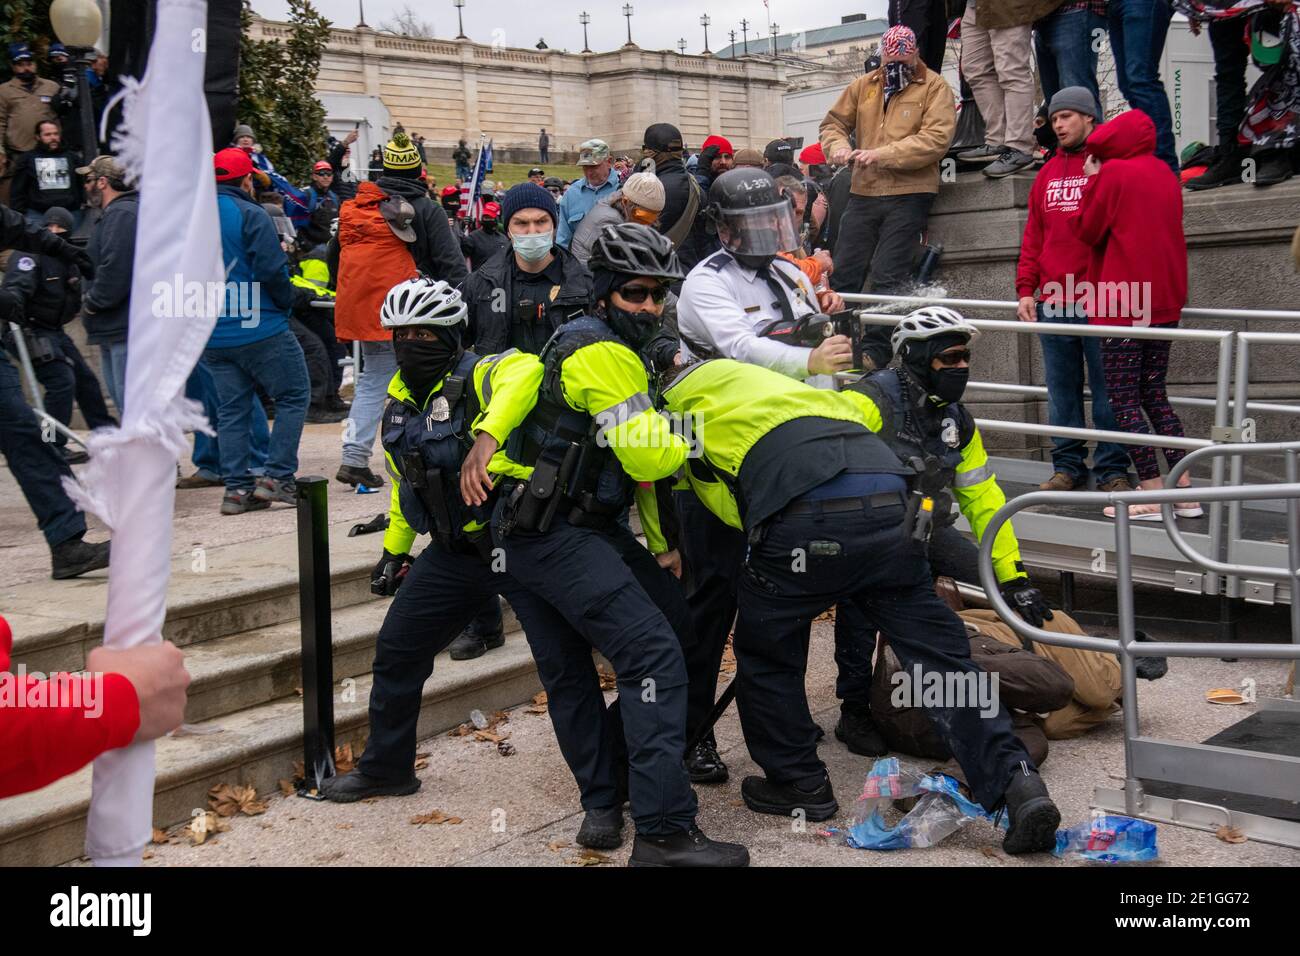 Washington, USA. 06th Jan, 2021. Police make an arrest and deploy pepper spray as supporters of President Trump storm the United States Capitol on January 6, 2021. The joint session of the House and Senate was sent to recess after the breach as it convened to confirm the Electoral College votes cast in November's election. (Photo by Matthew Rodier/SiPA USA) Credit: Sipa USA/Alamy Live News Stock Photo